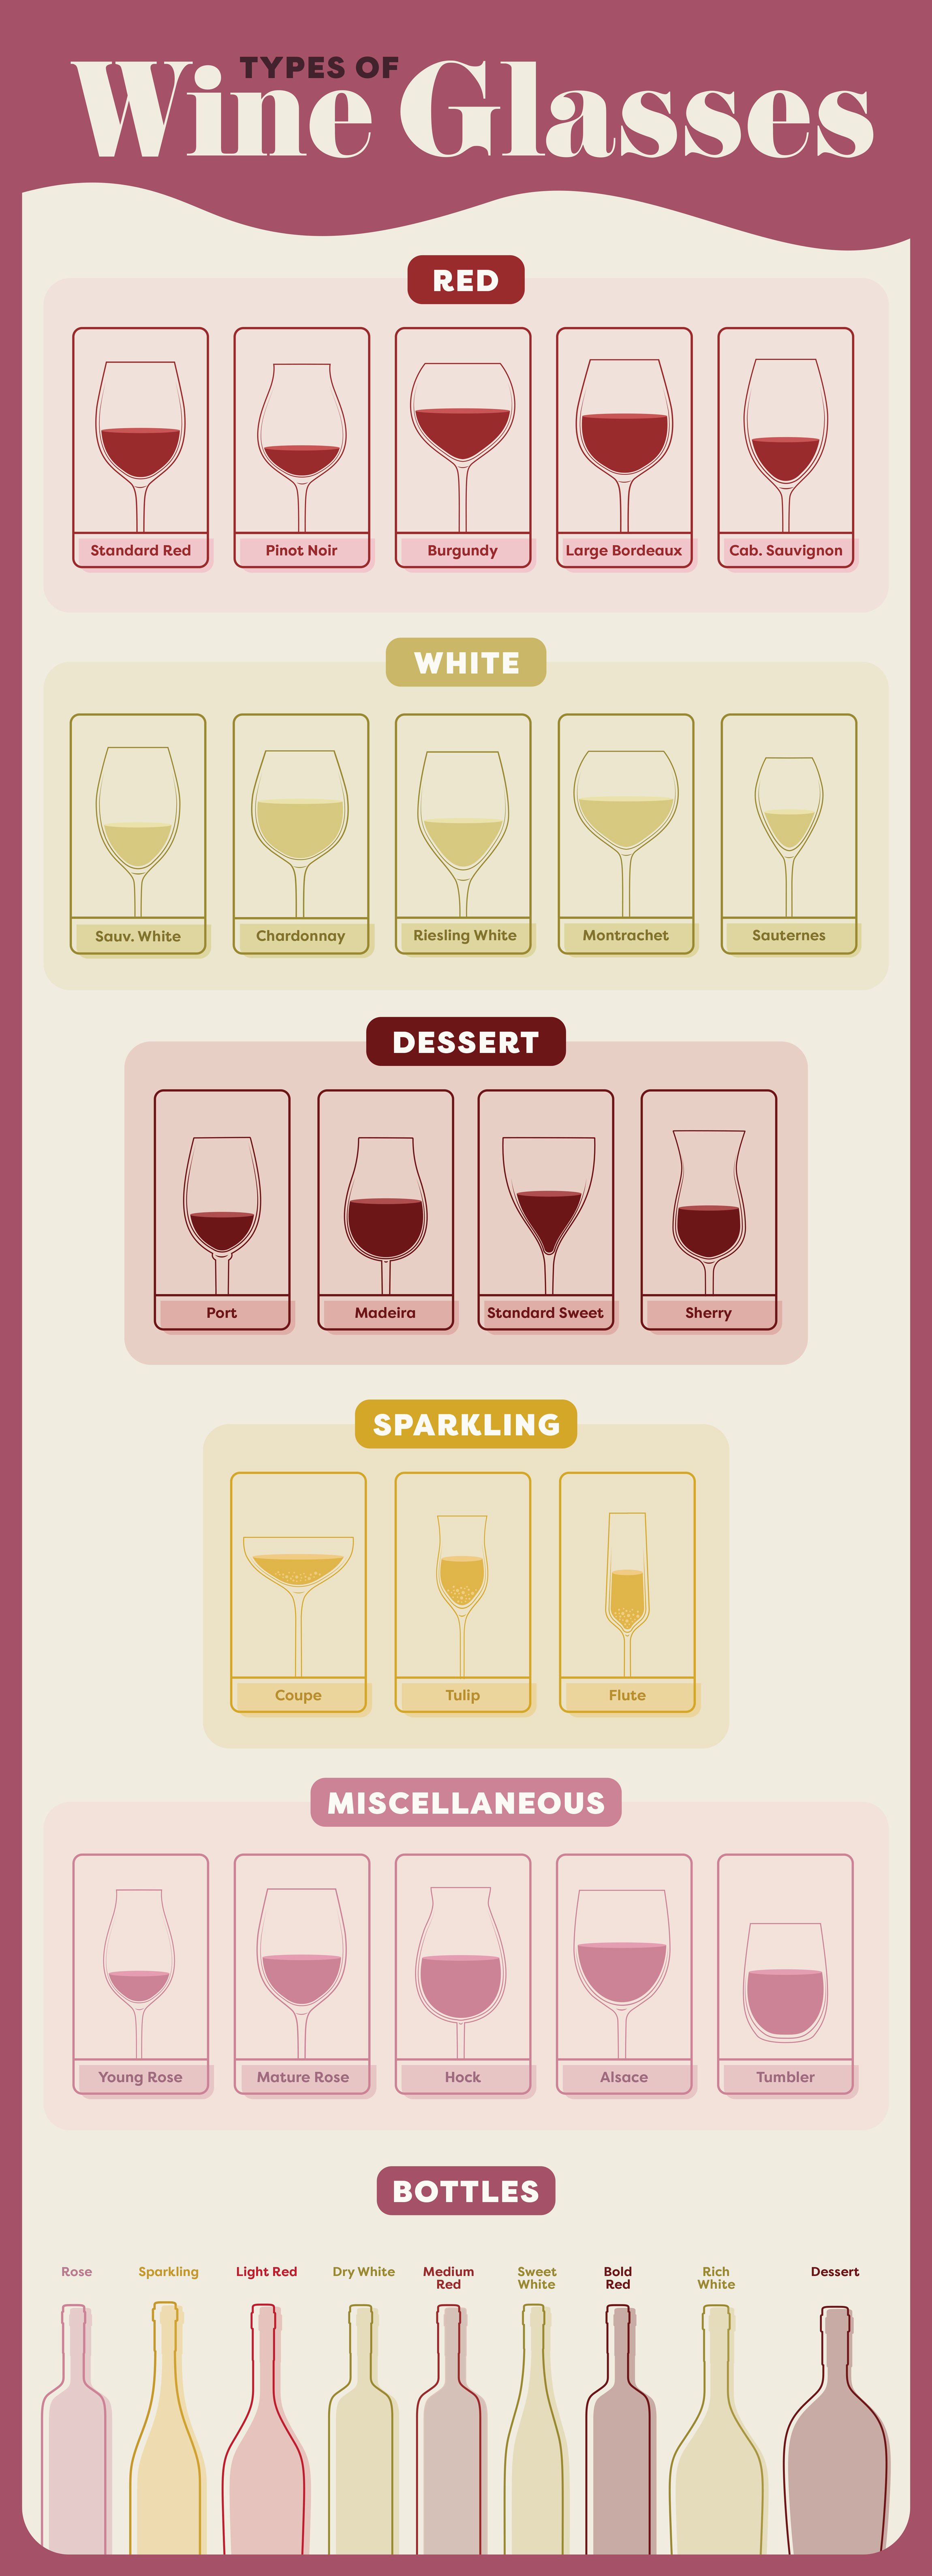 Types of Wine Glasses Chart